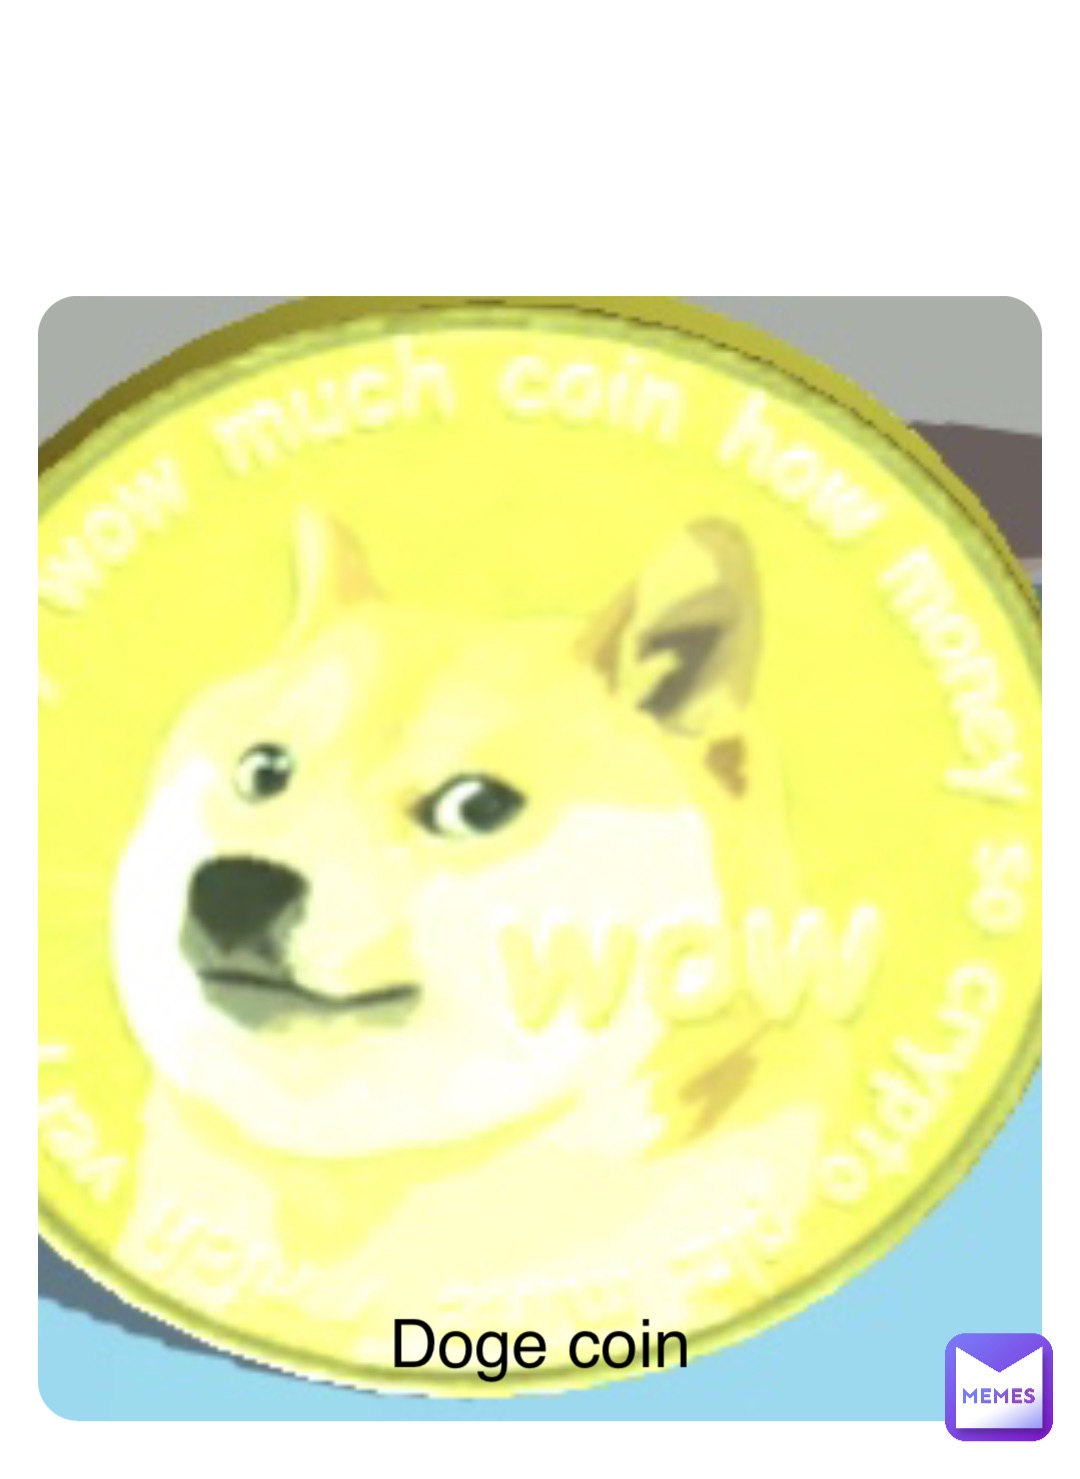 Double tap to edit Doge coin